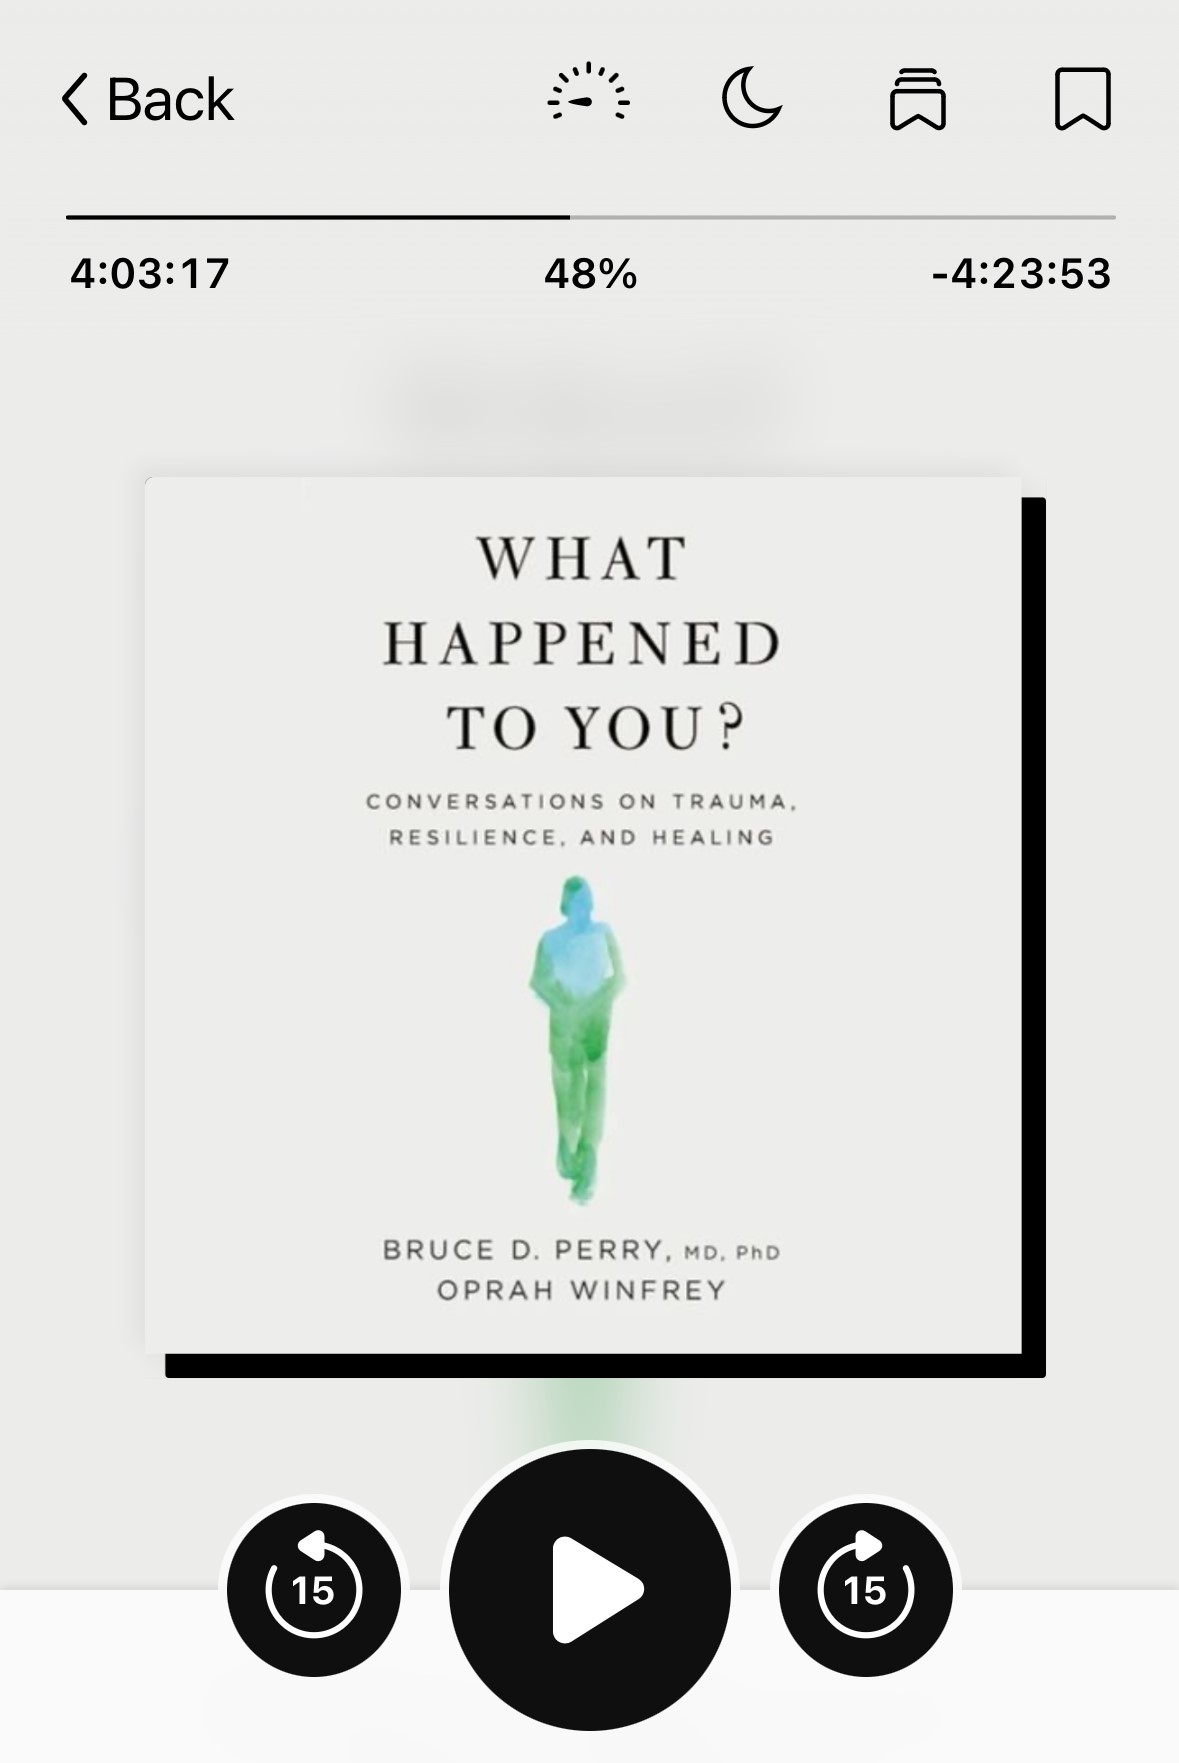 Audiobook view of the book What Happened to You